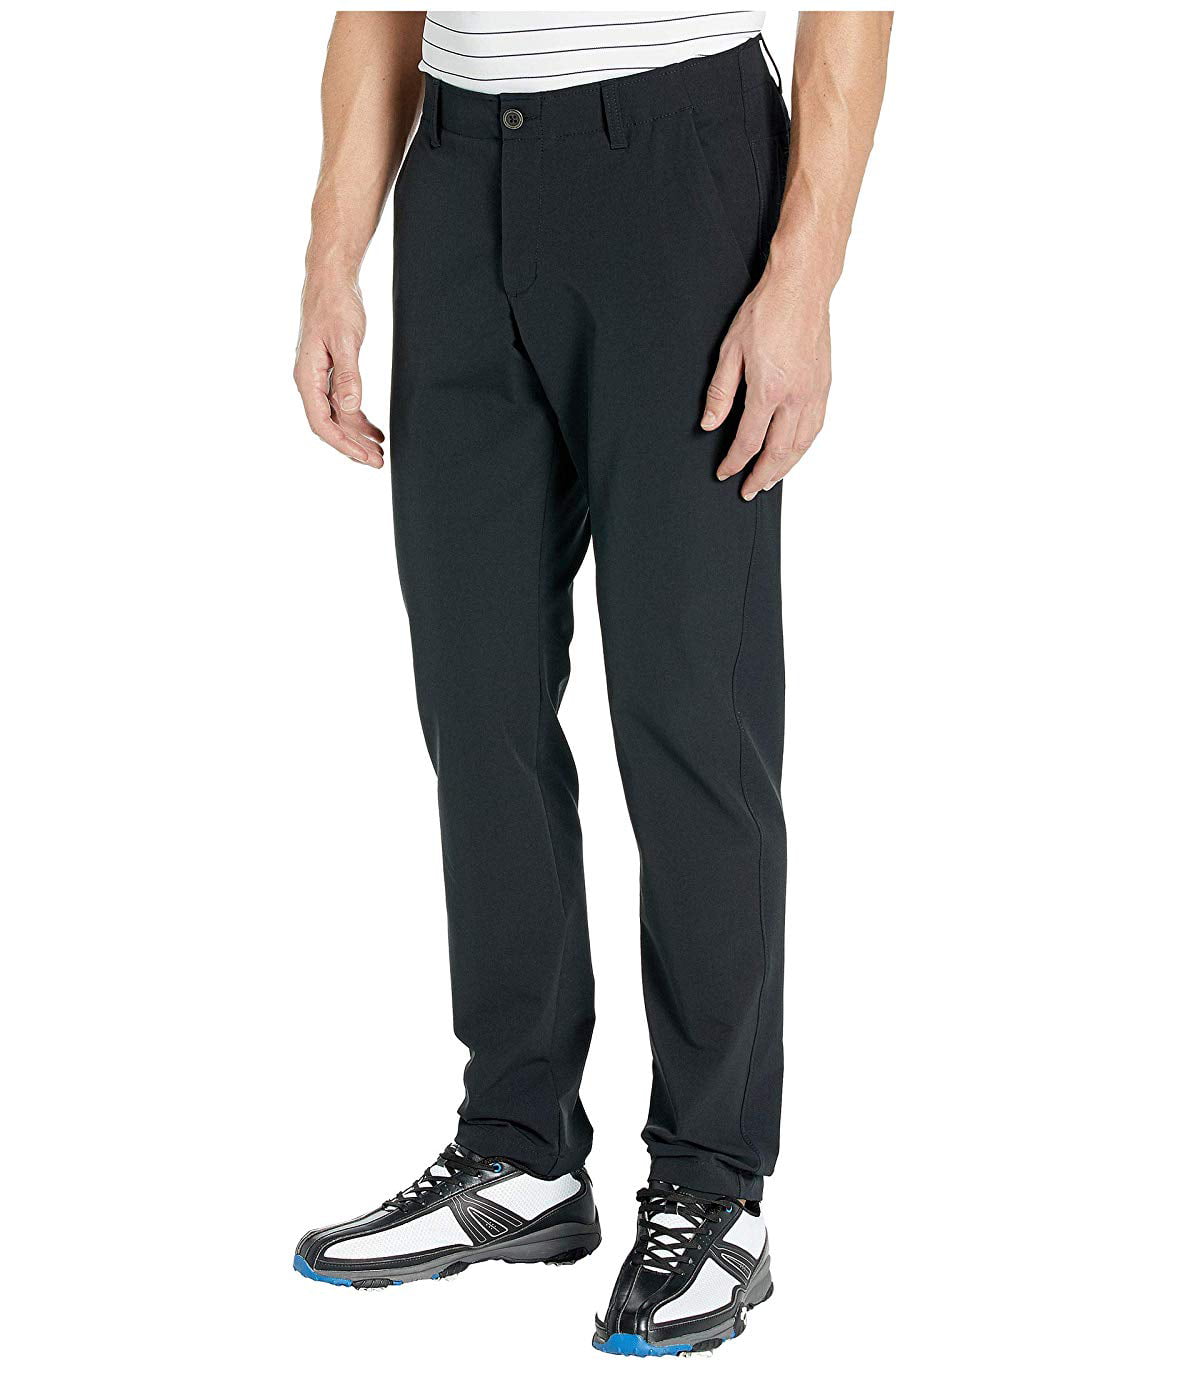 Buy > under armour coldgear infrared golf pants > in stock